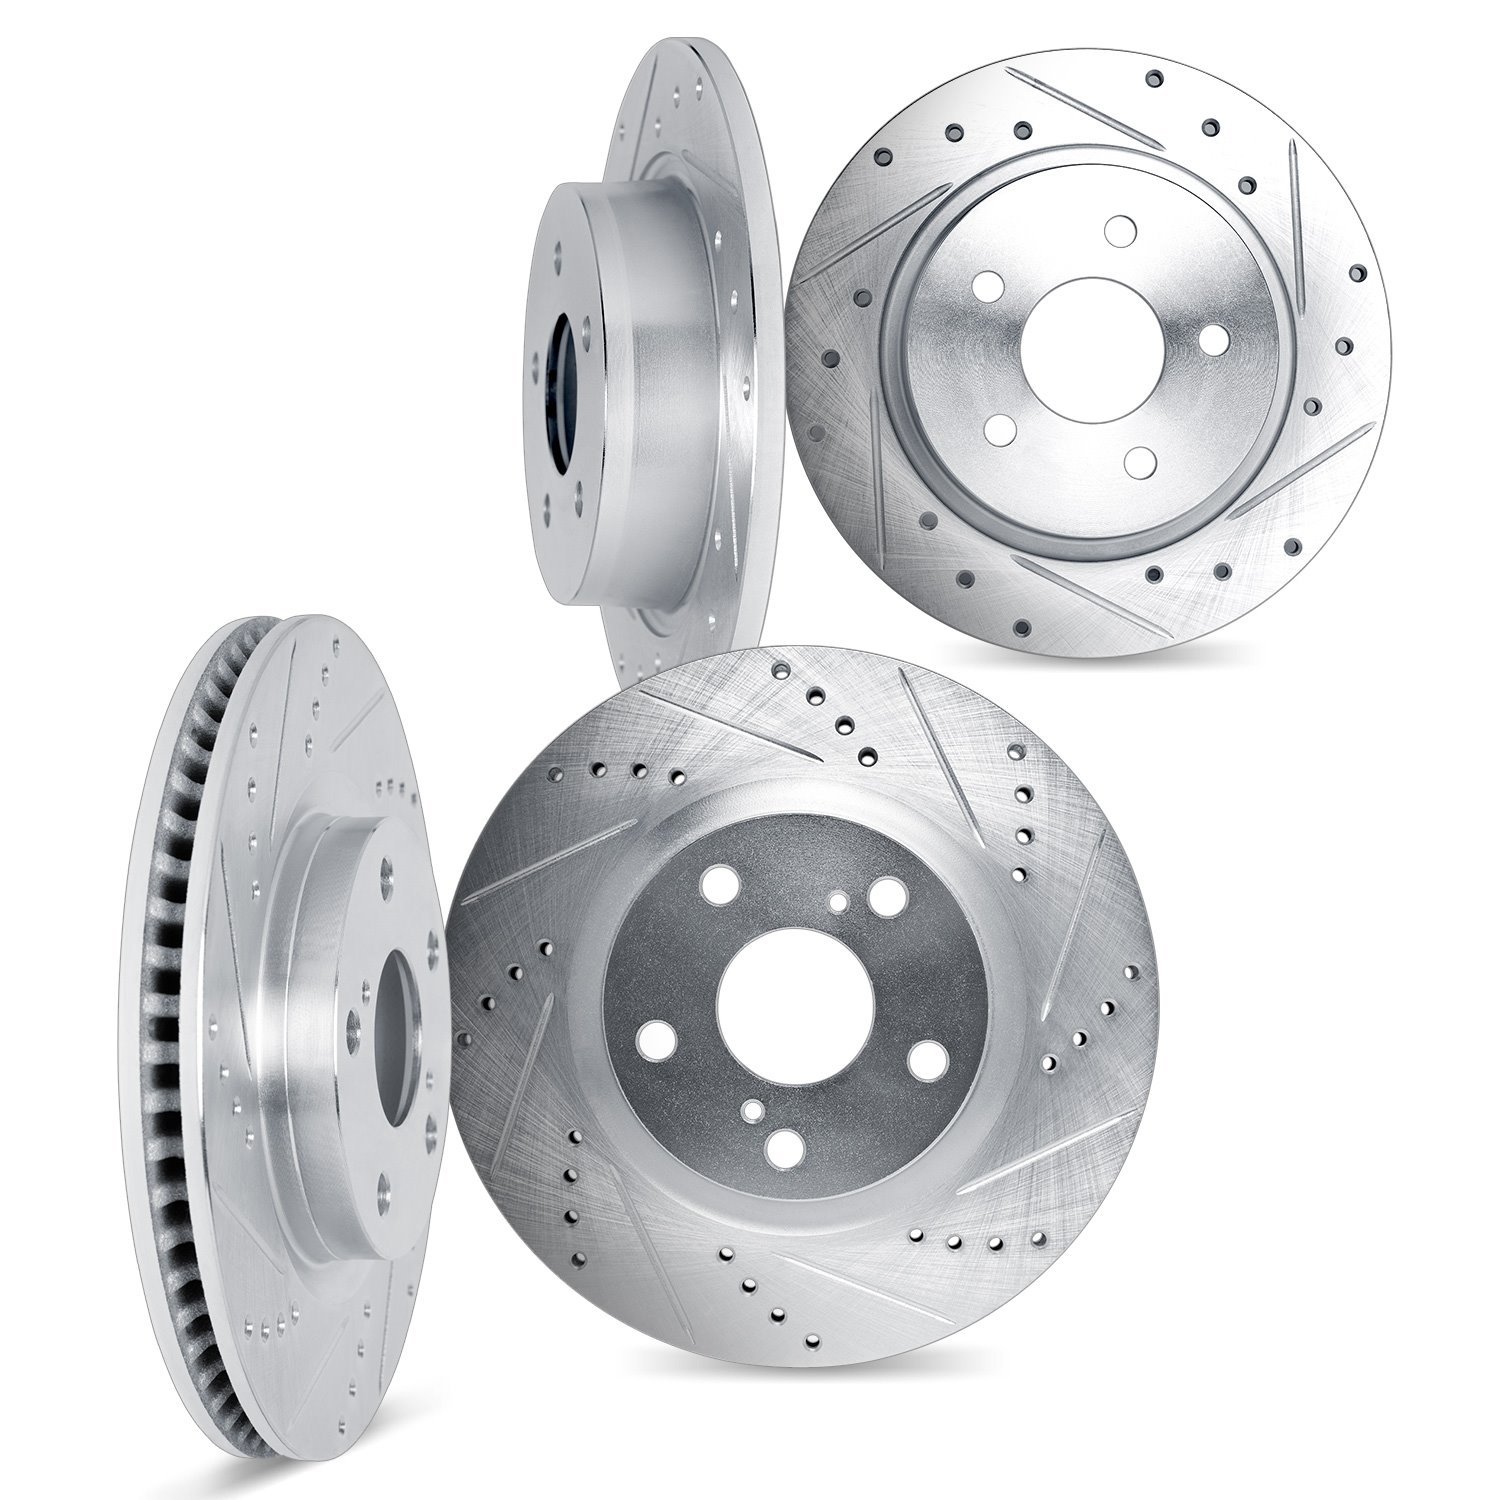 7004-59009 Drilled/Slotted Brake Rotors [Silver], Fits Select Acura/Honda, Position: Front and Rear